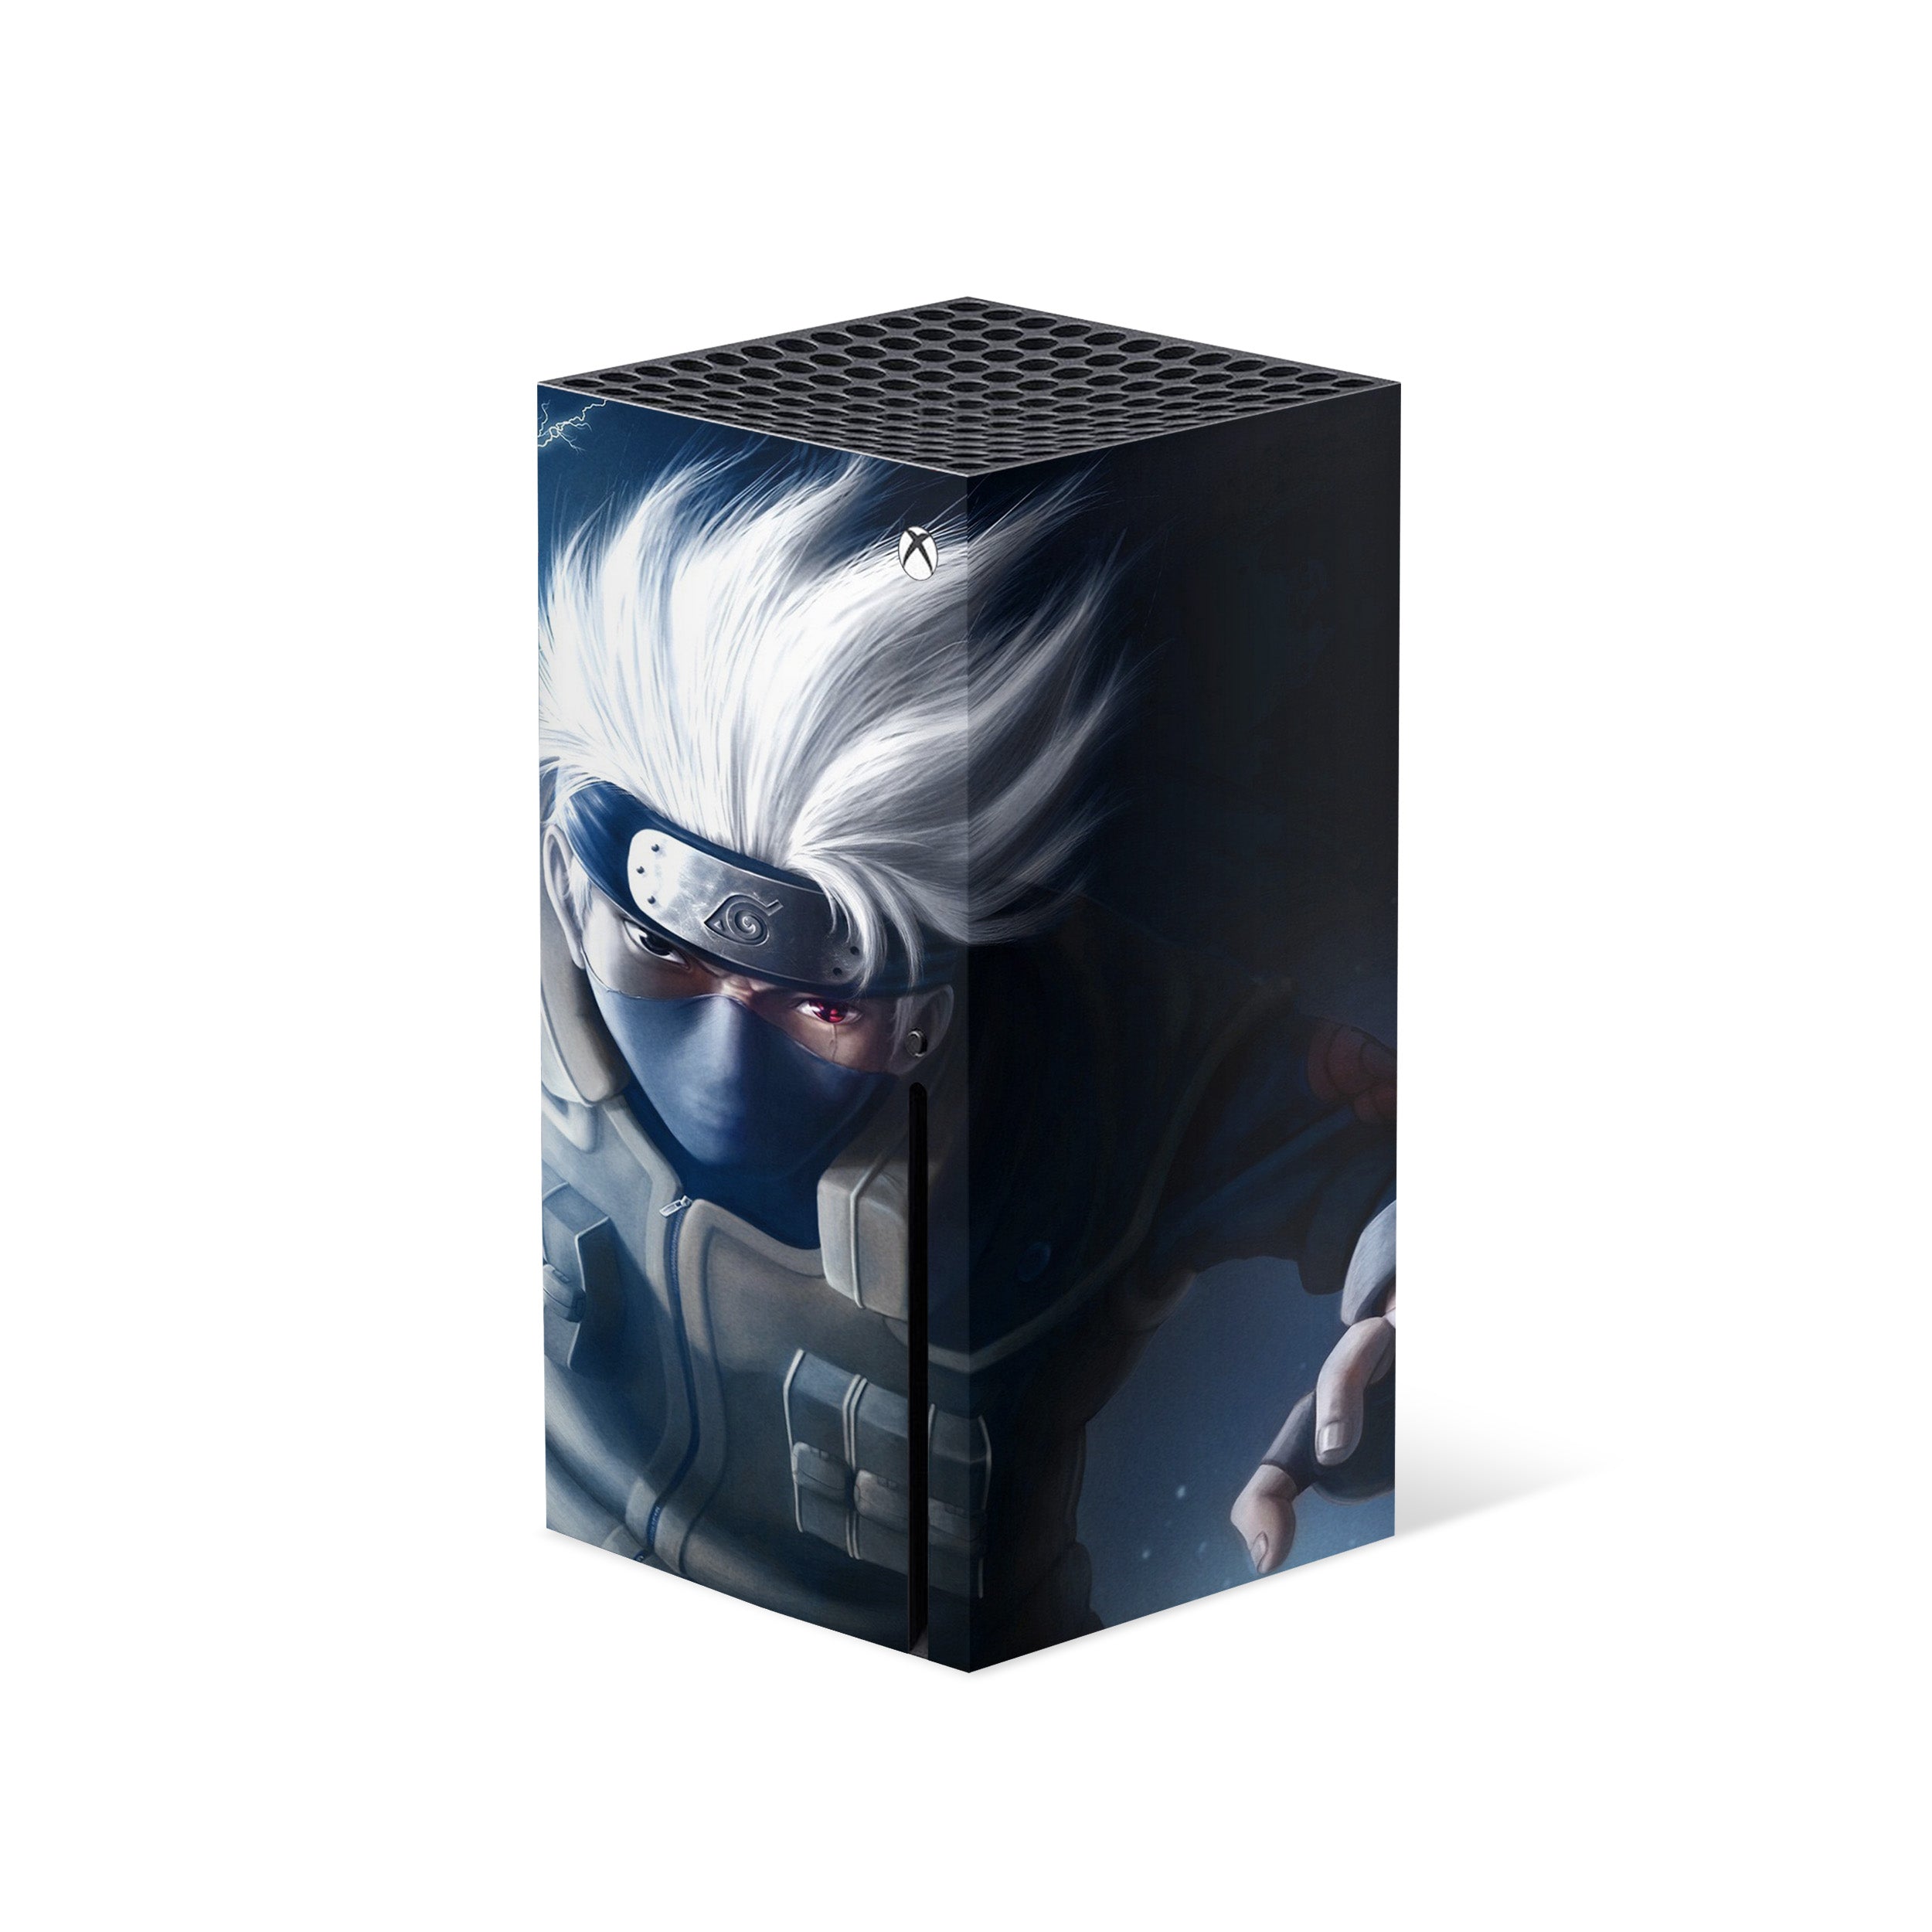 A video game skin featuring a Naruto Kakashi design for the Xbox Series X.